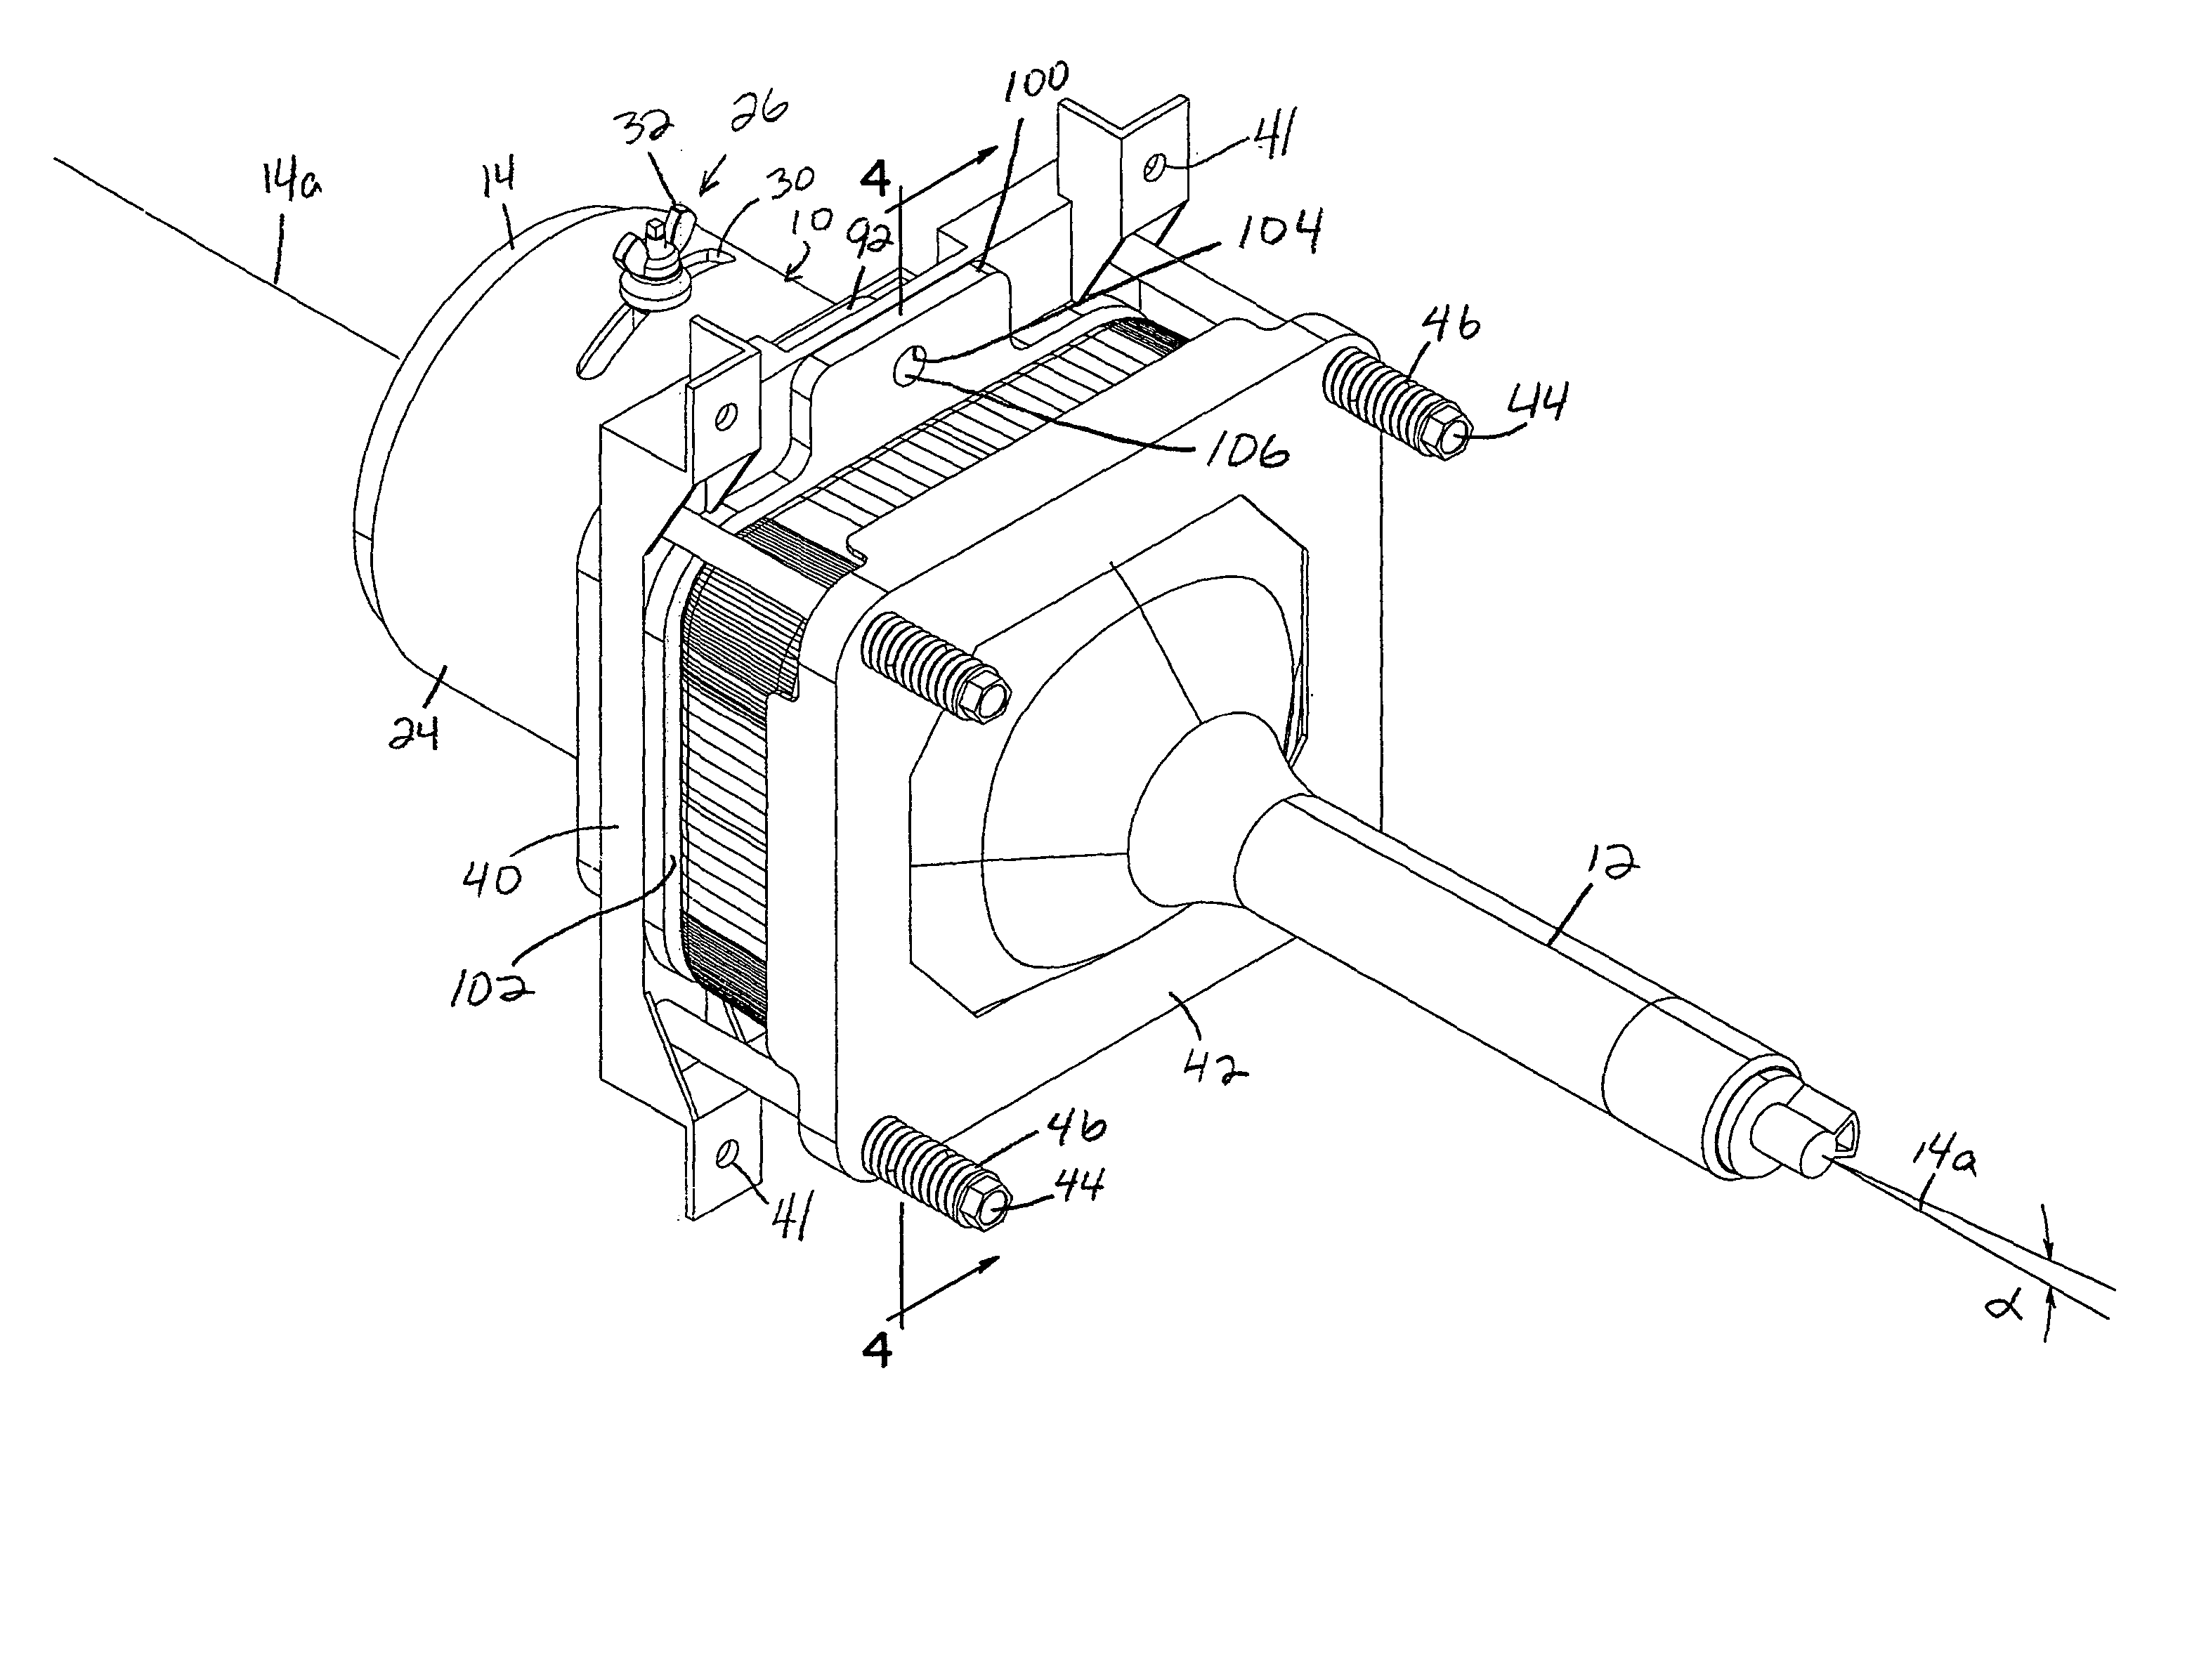 Lens assembly with integrated focus mount and CRT coupler